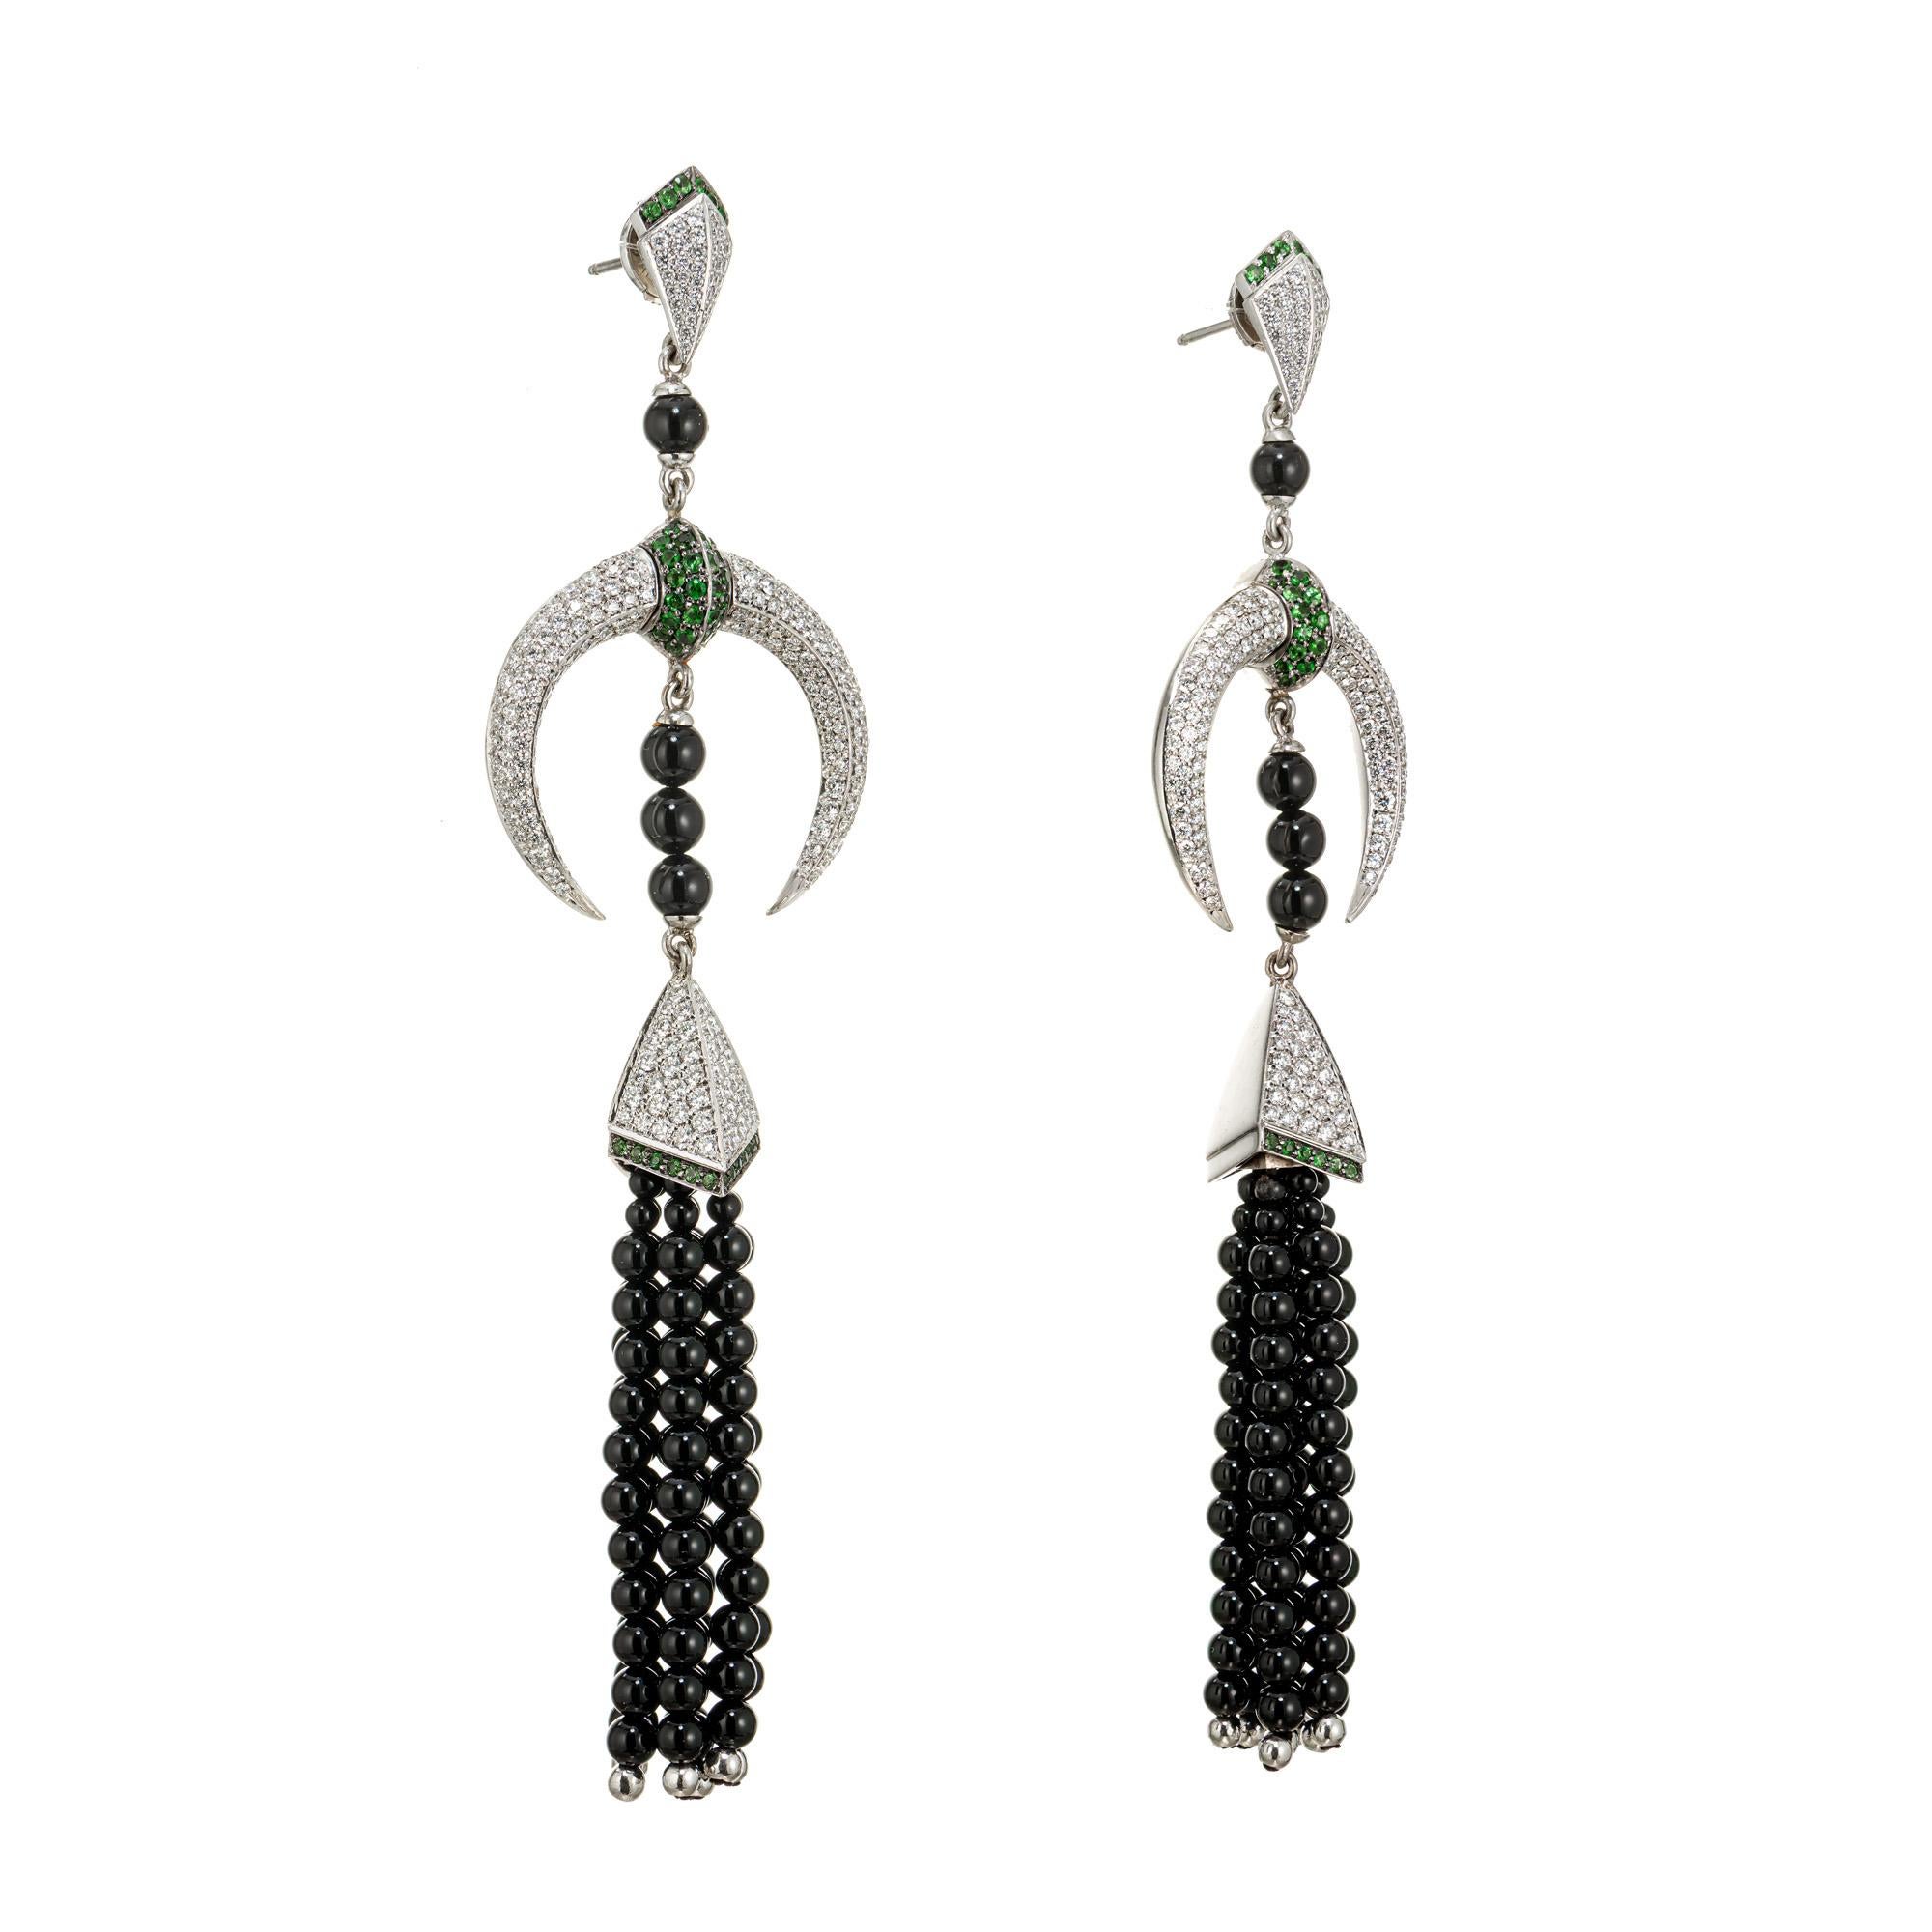 Shaun Leane Onyx Tassel, diamond and tsavorite 18 karat white gold dangle chandelier earrings. inspired by the Art Deco period Shaun Leane Tribal Deco is his own blended style. 

Approx. 108 round green Tsavorite, approx. total weight .76cts
Approx.